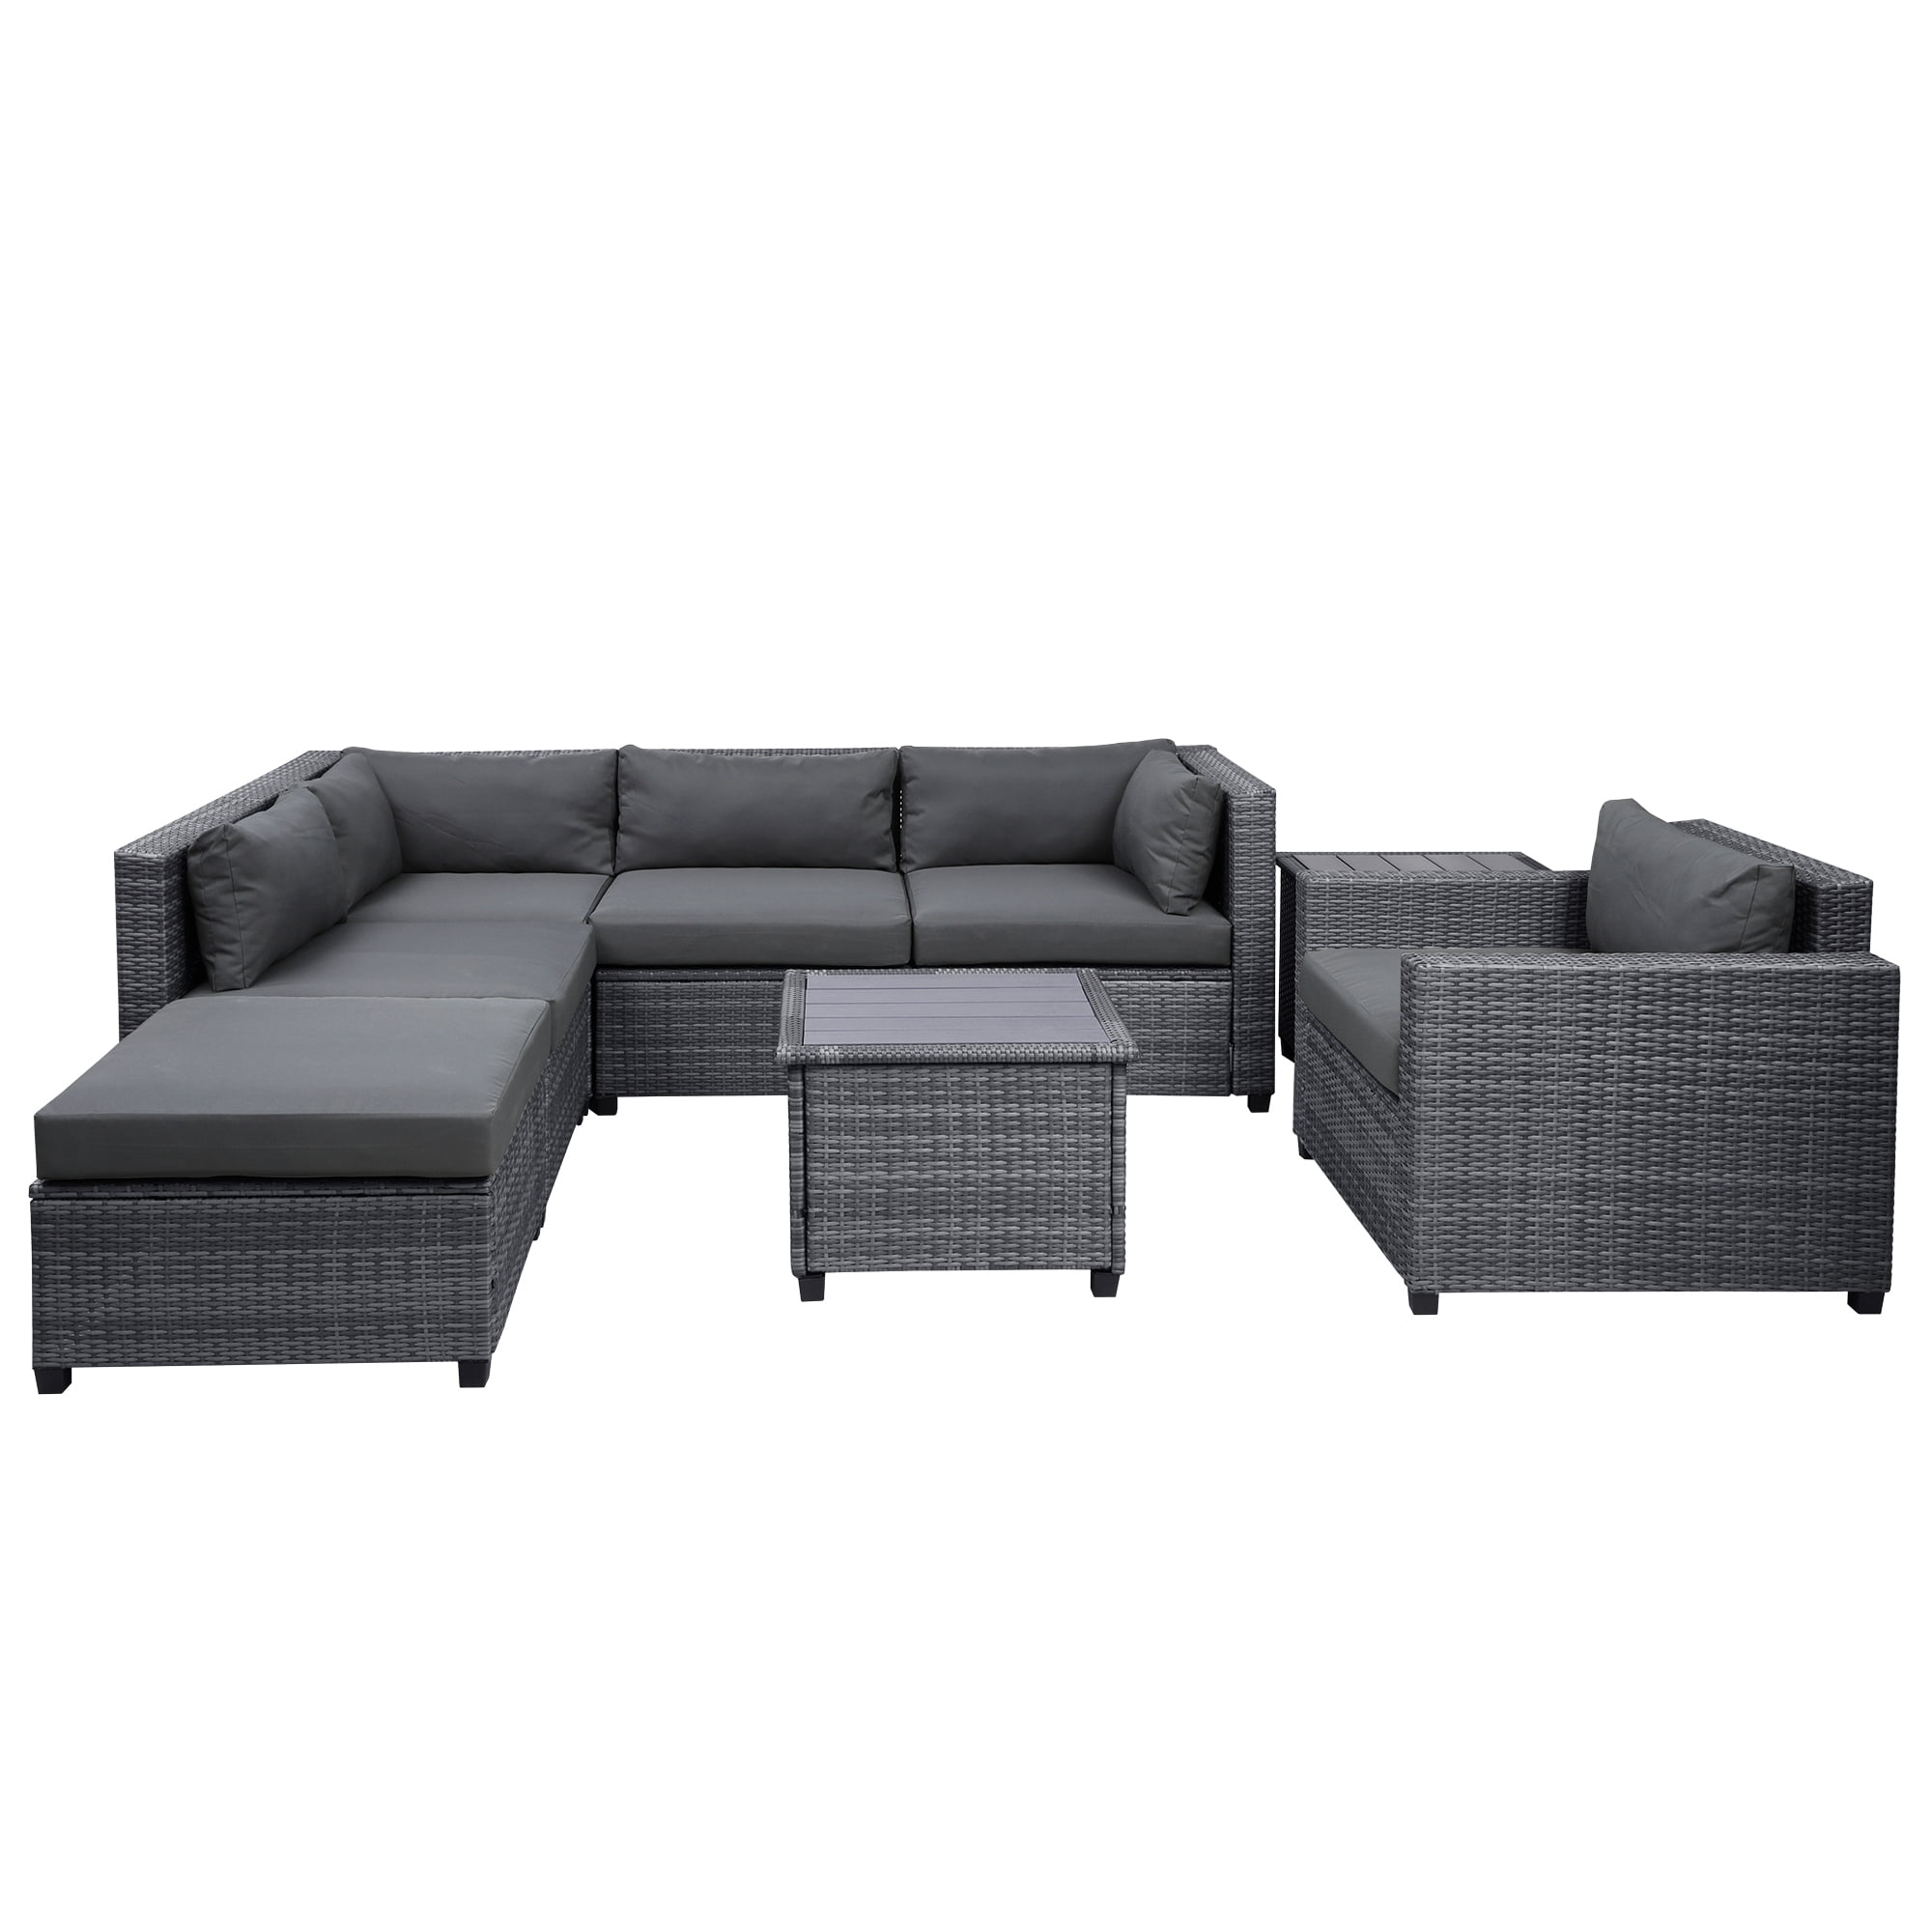 Set Garden Sectional All-Weather Tables, Set, for Set, Outdoor Group Seating Wicker 8 Pool Morden 2 Couch Deck Rattan Patio & Coffee Sofa with Piece Furniture Sectional Cushions Conversation